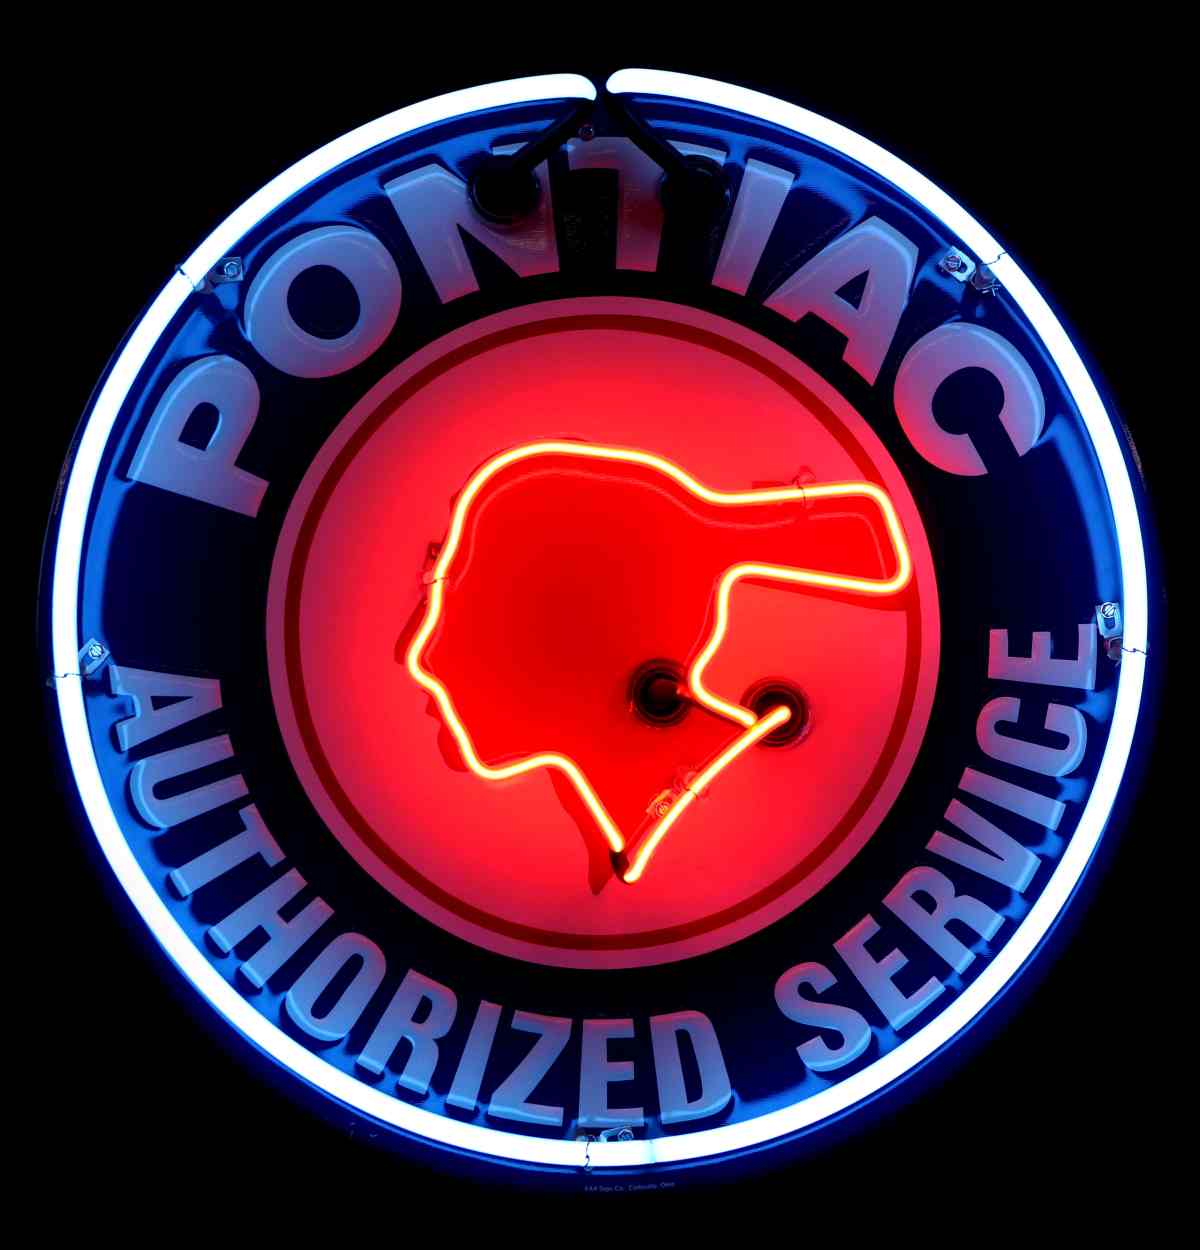 A MODERN PONTIAC SERVICE SIGN WITH NEON